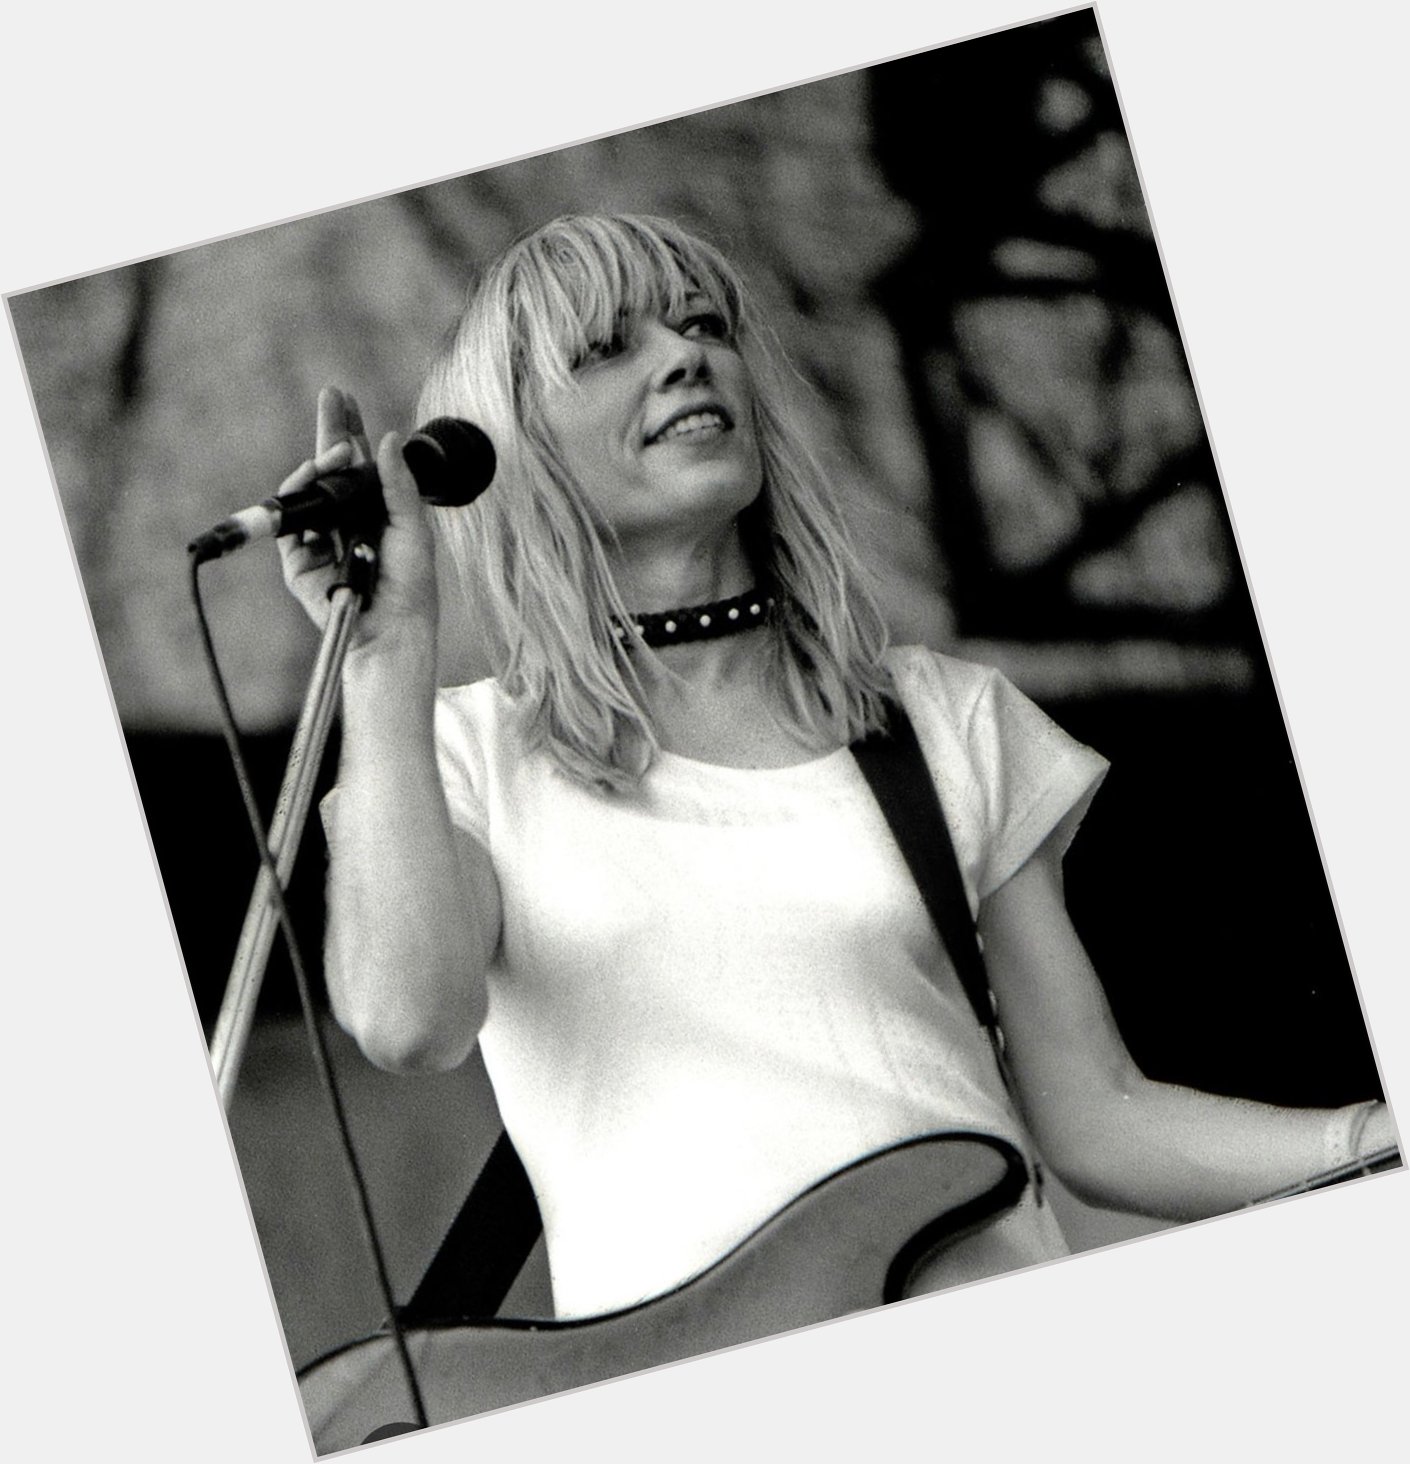 Happy 70th birthday Kim Gordon you are still one of the greatest bassists ever 